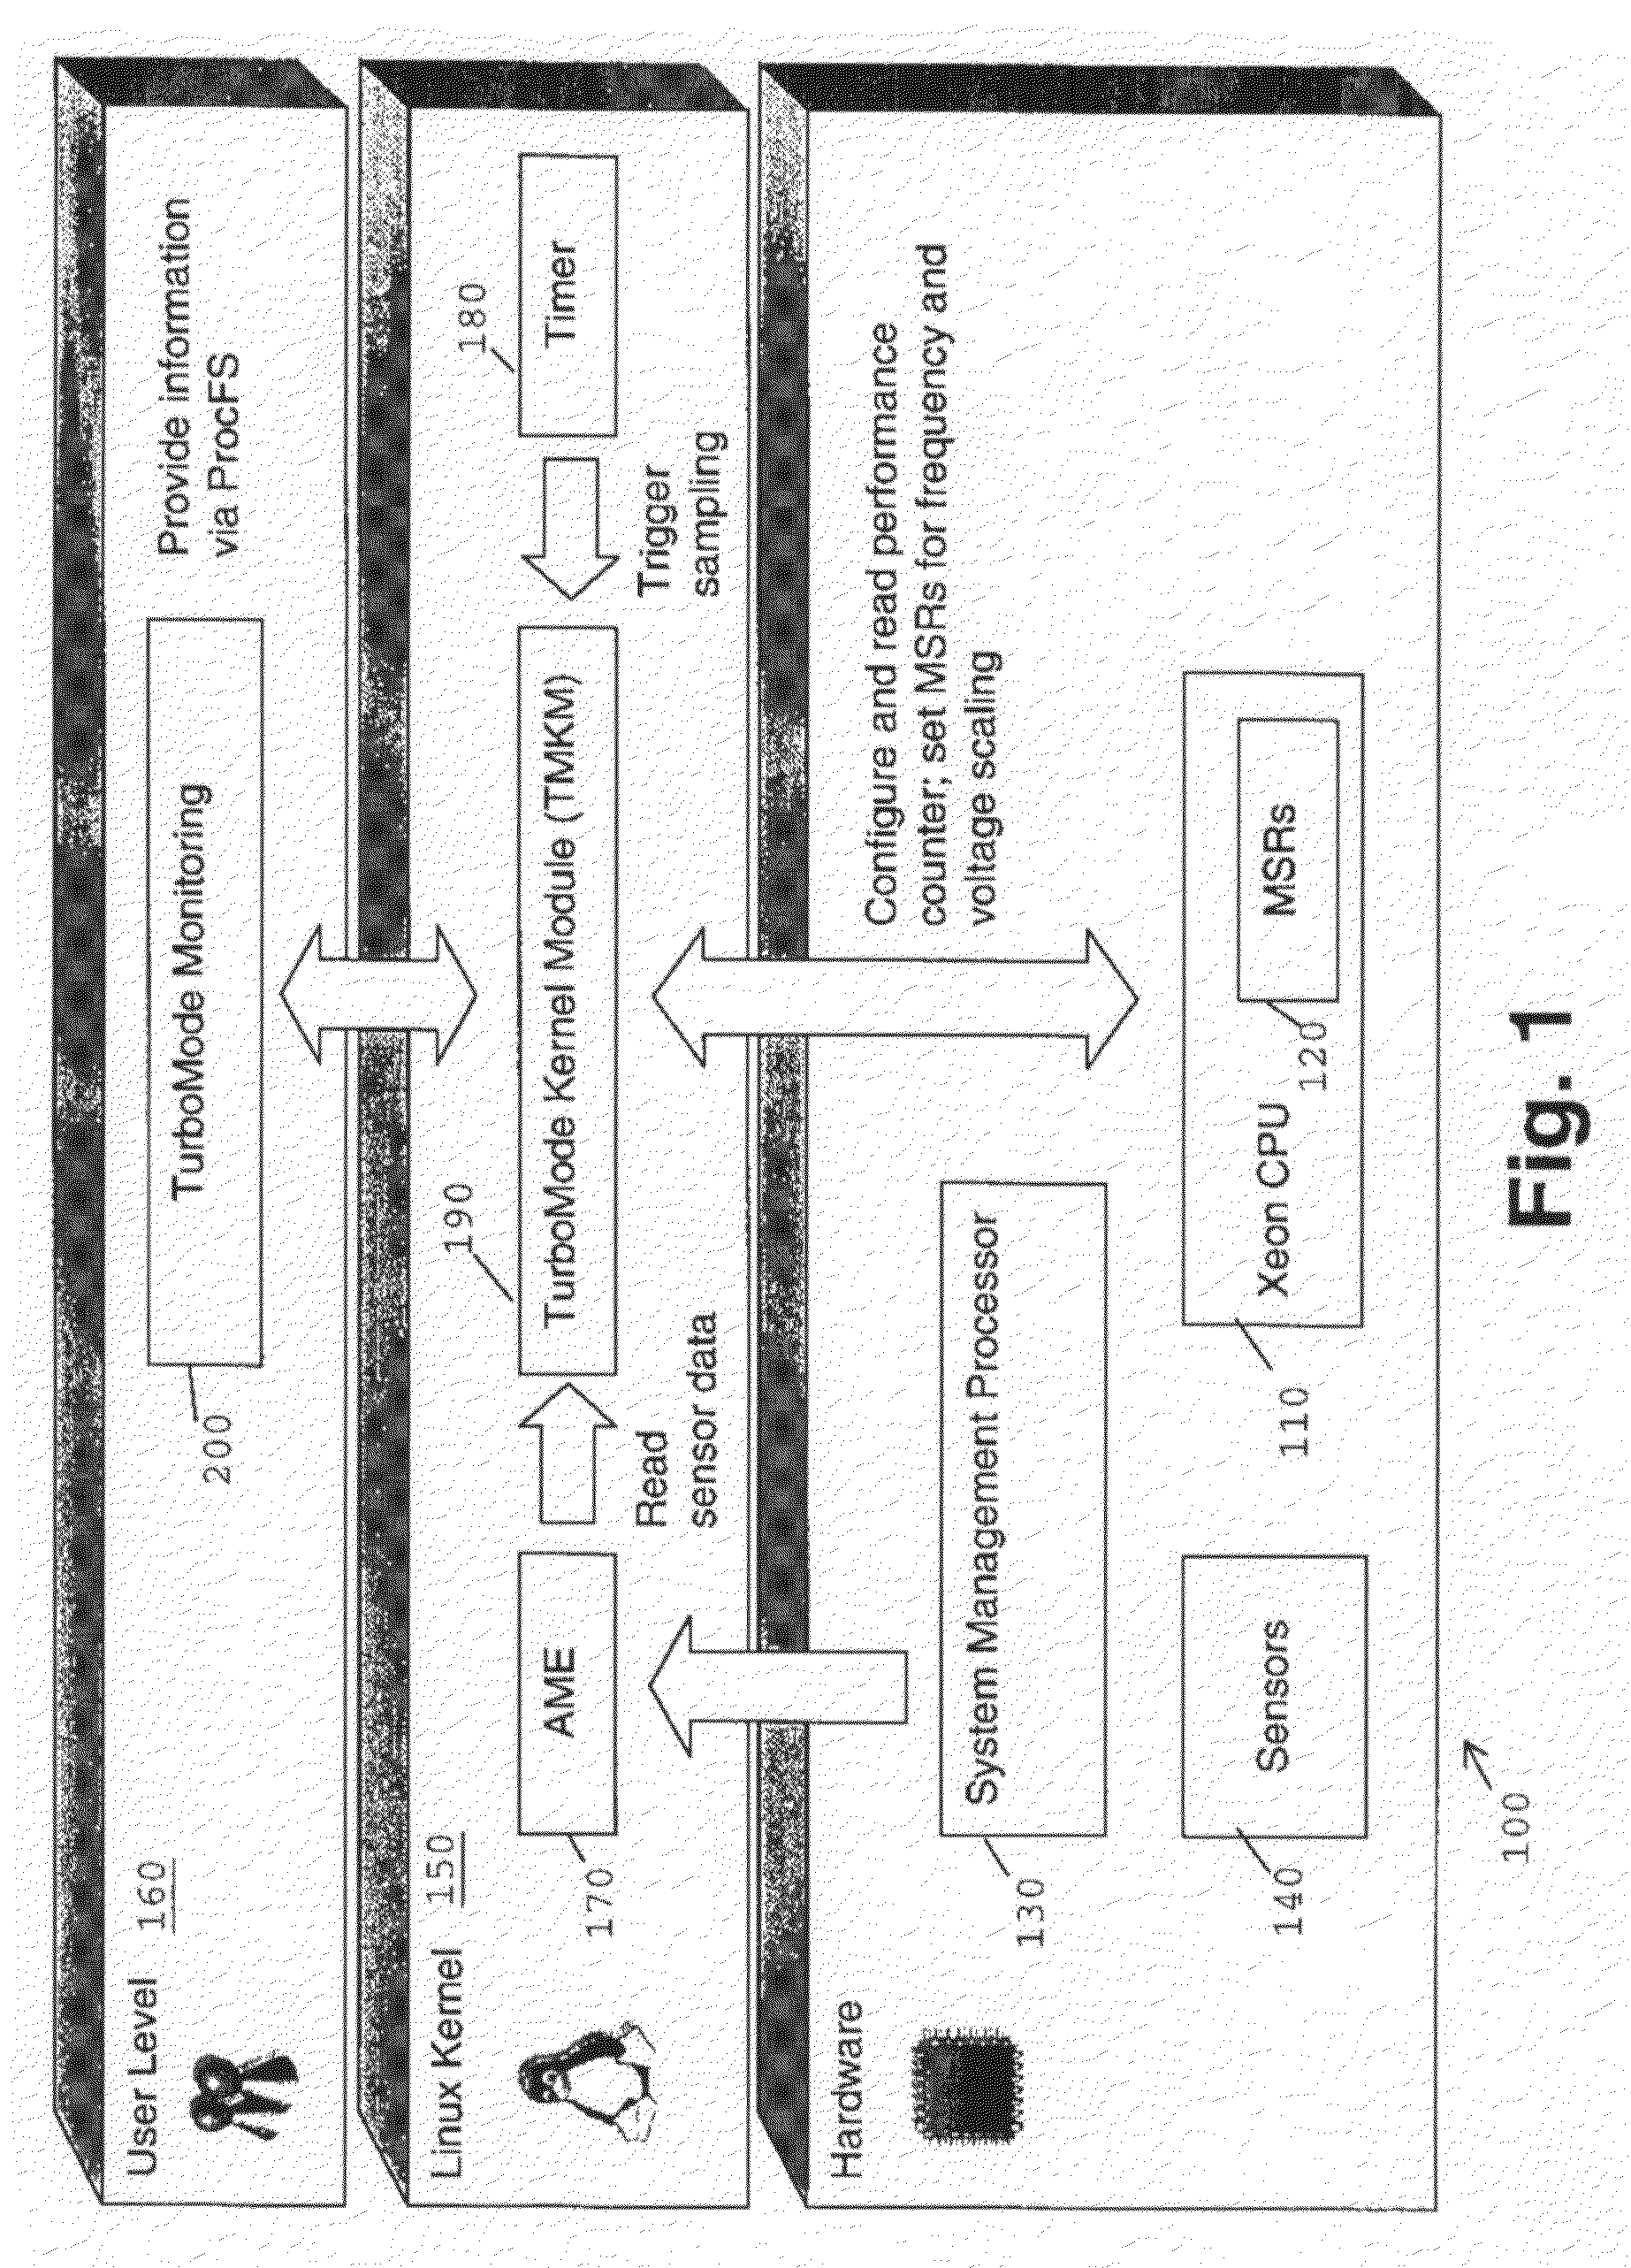 Method for autonomous dynamic voltage and frequency scaling of microprocessors